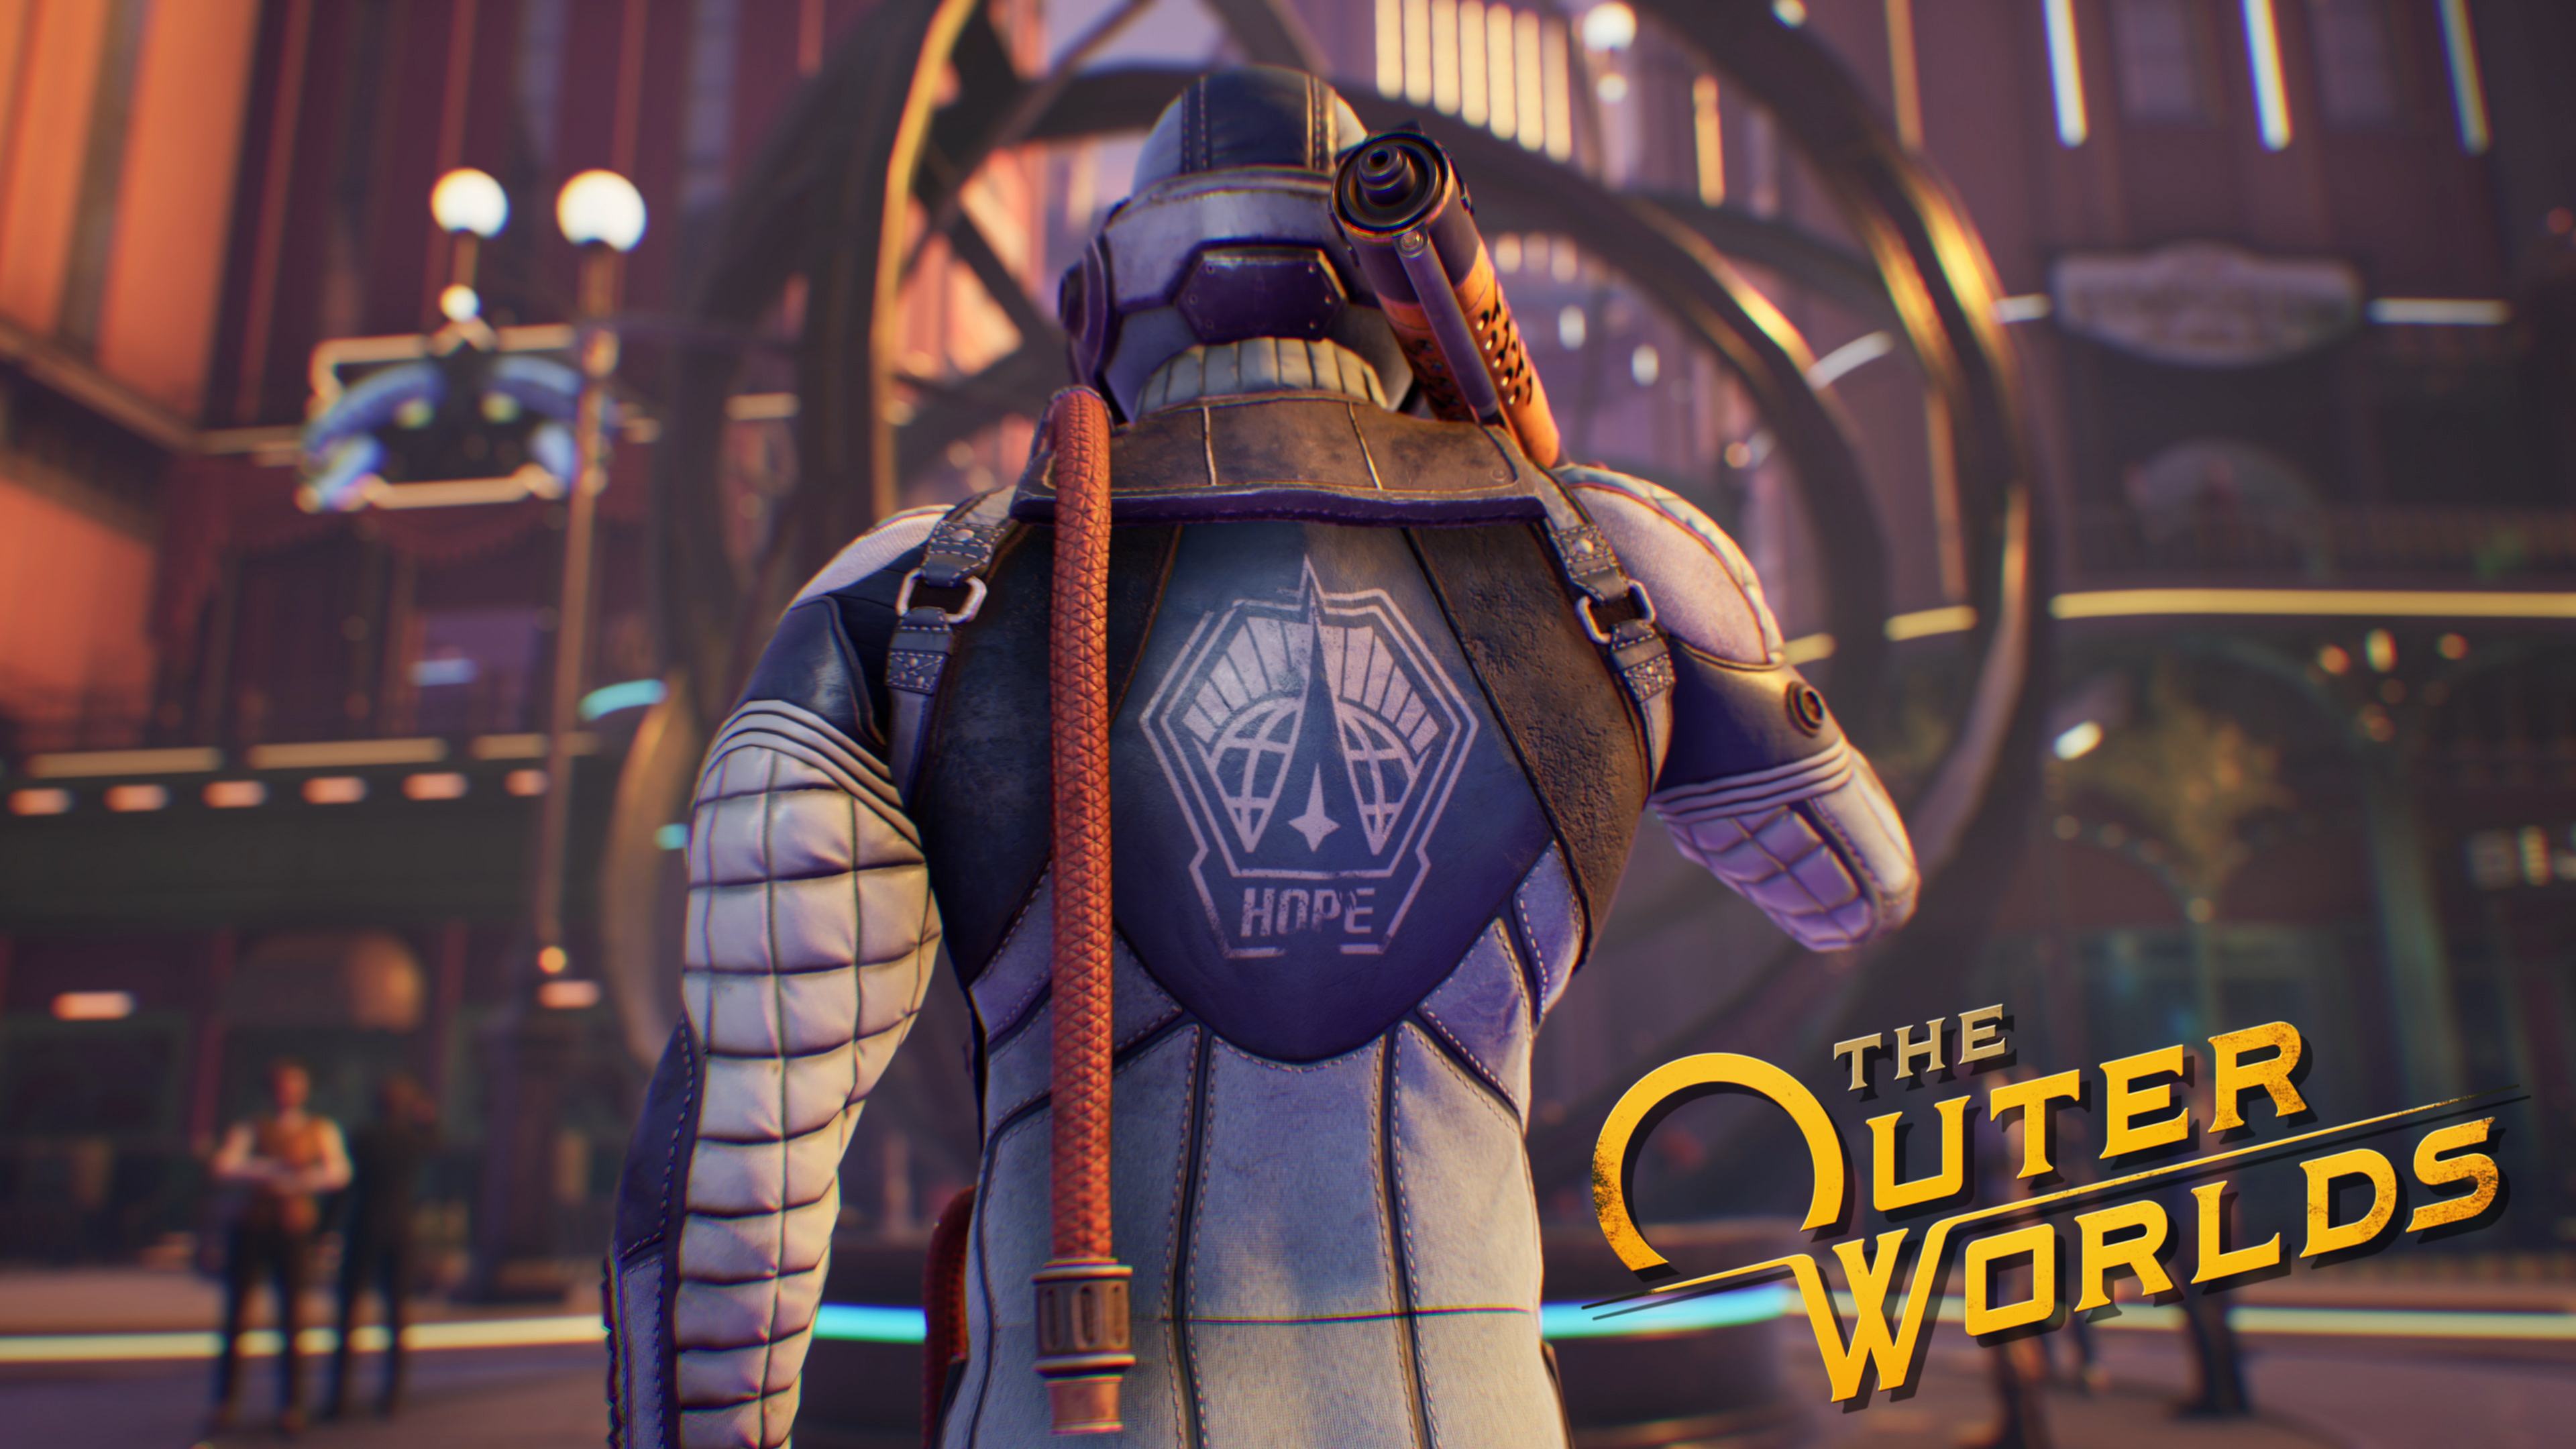 The Outer Worlds Video Games 2019 Year PC Gaming 3840x2160